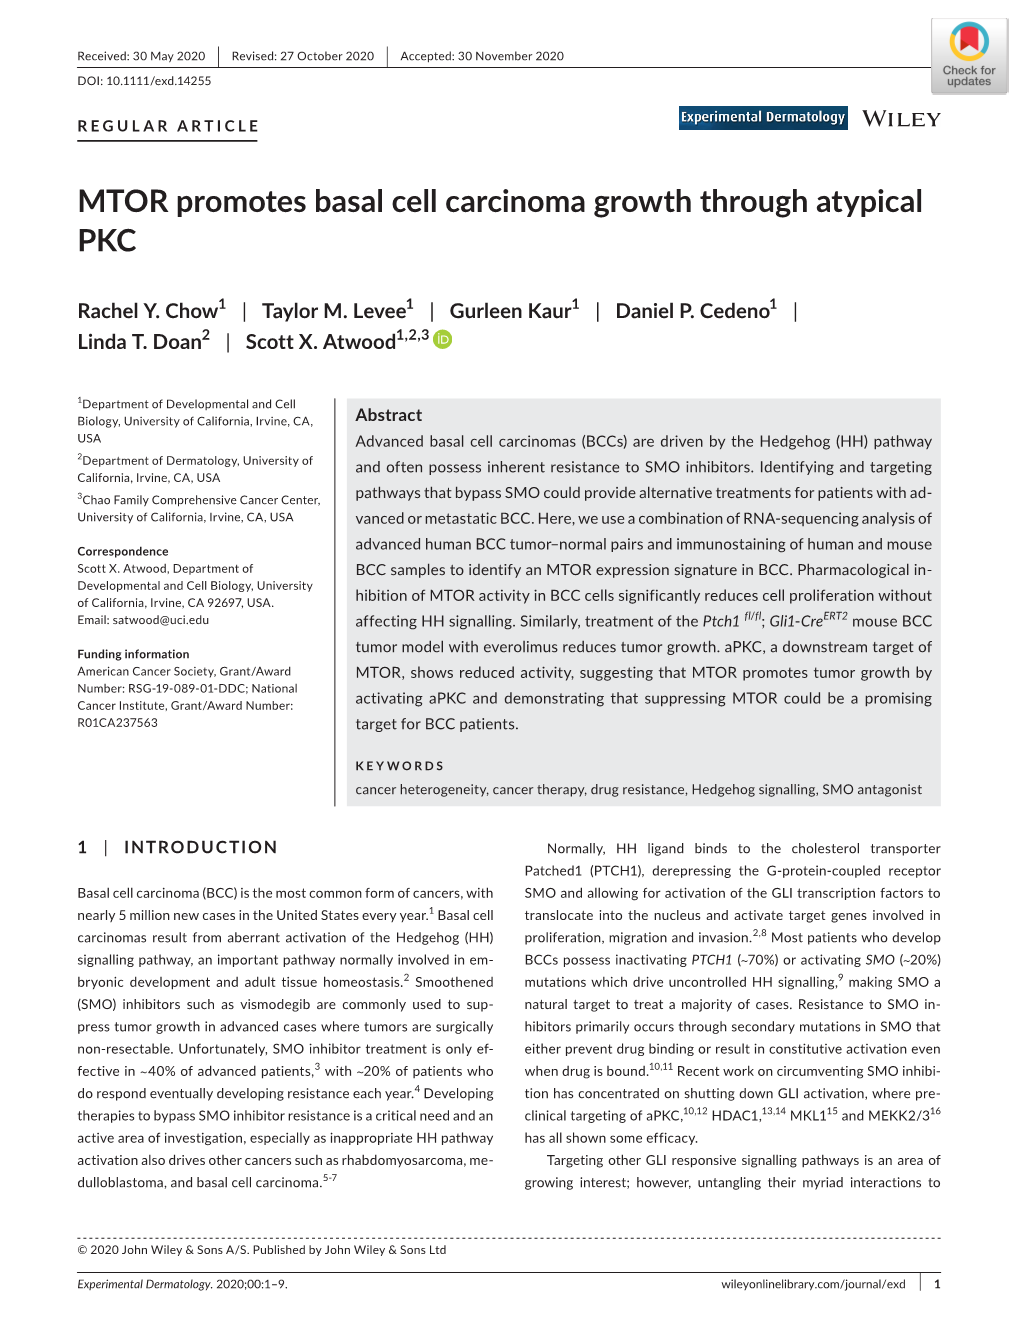 MTOR Promotes Basal Cell Carcinoma Growth Through Atypical PKC